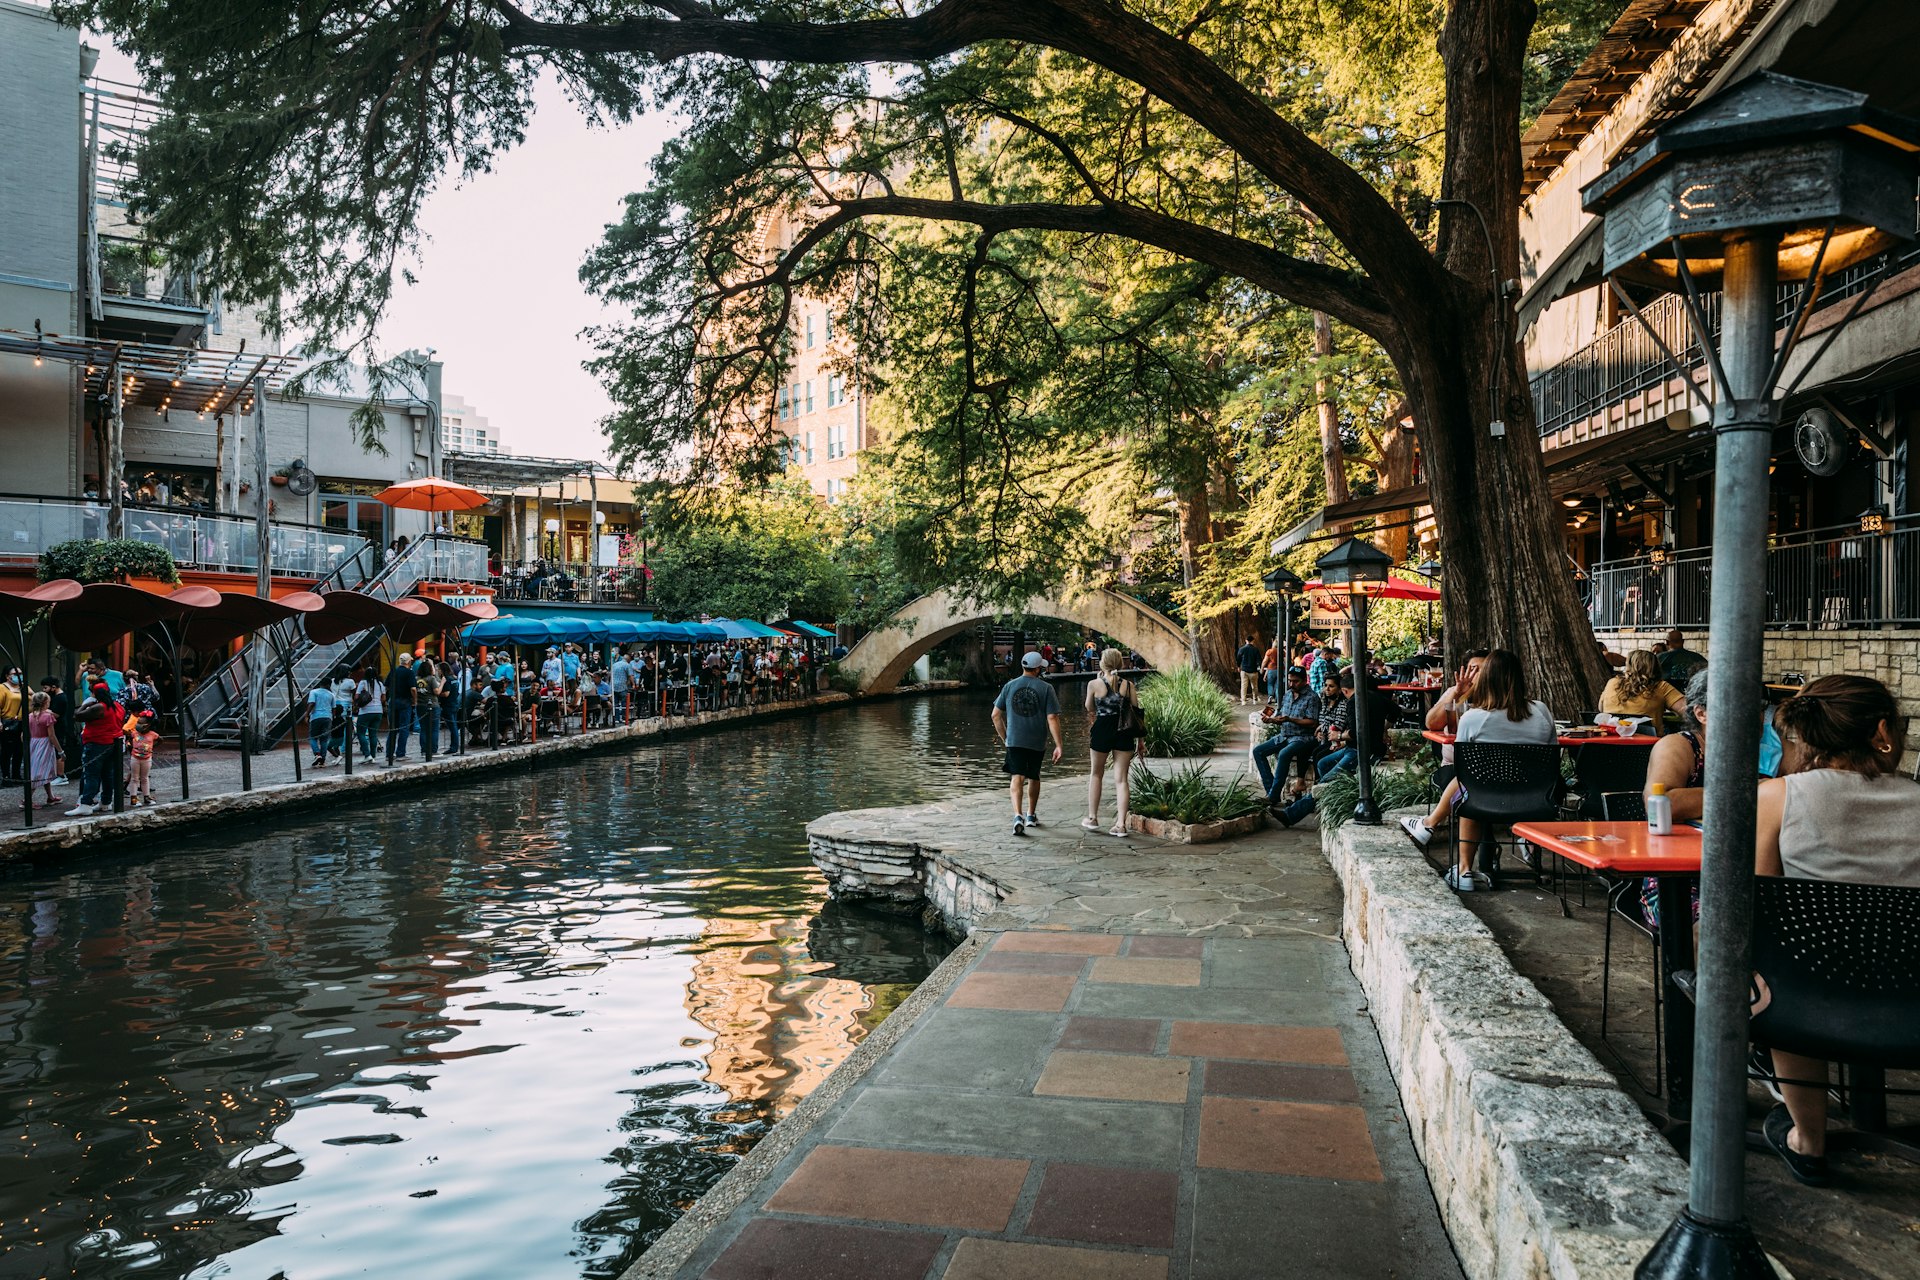 Street view of people walking and dining along the San Antonio River Walk